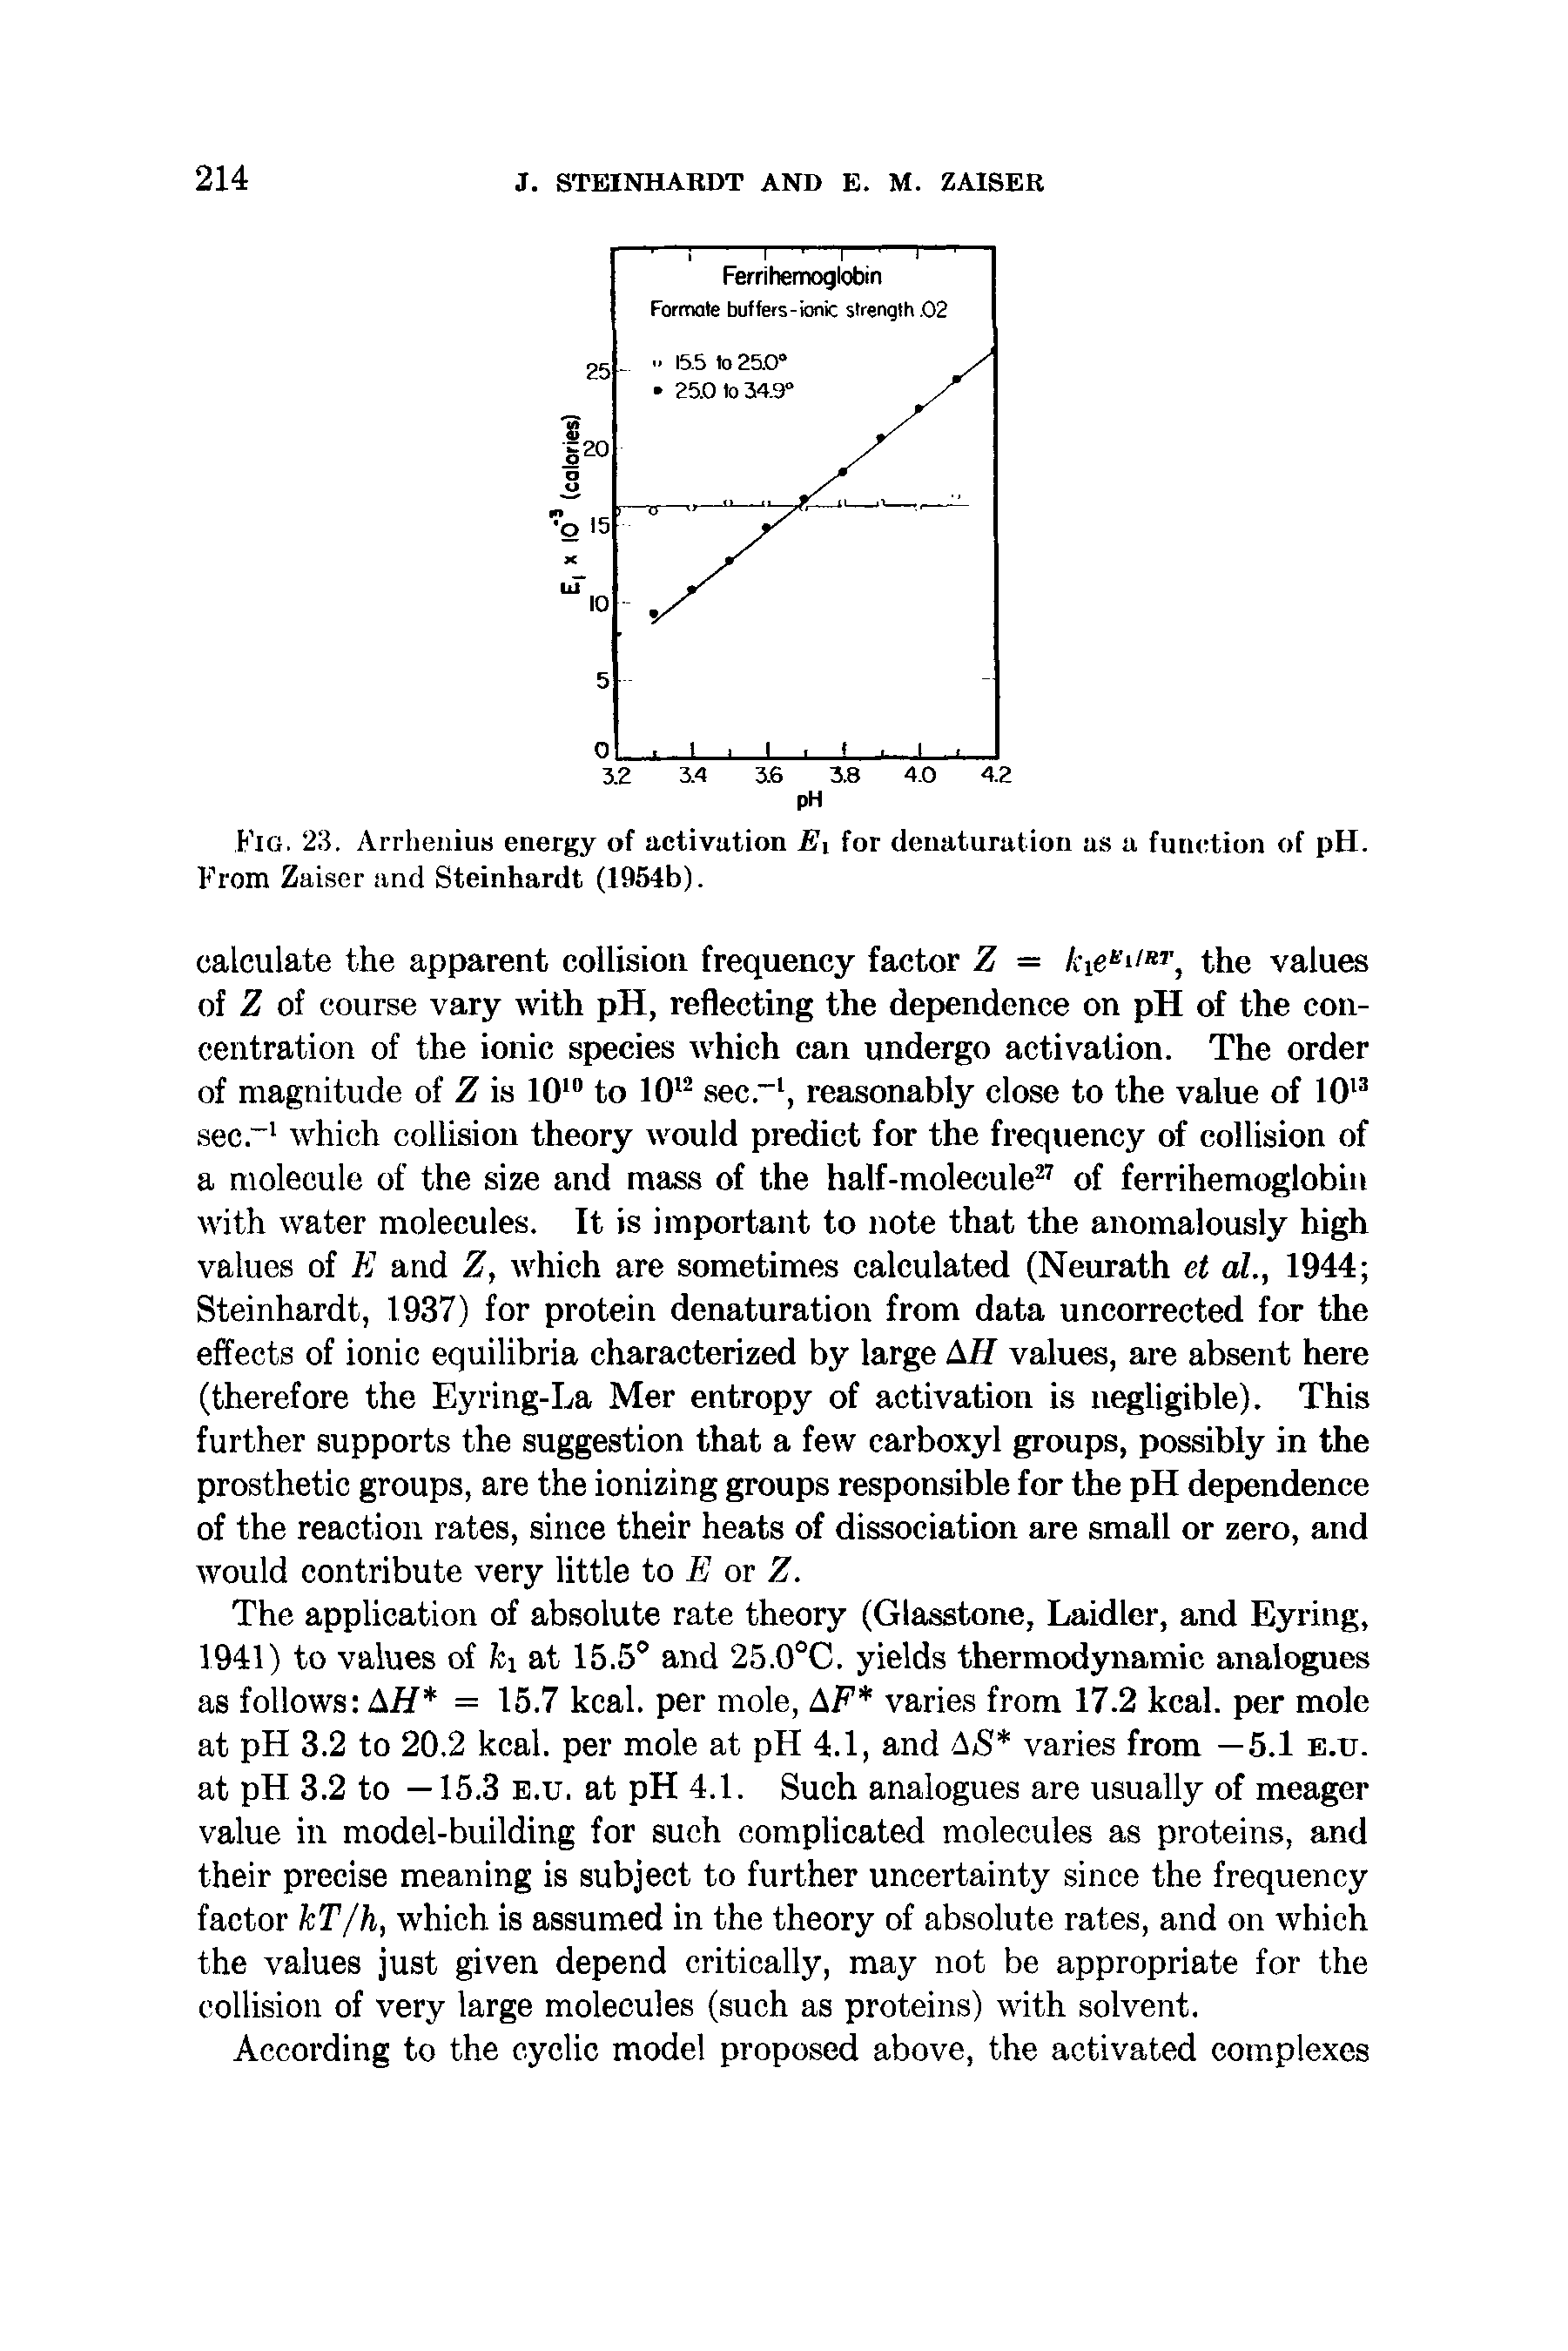 Fig. 23. Arrhenius energy of nctivution Ei for denaturation as a function of pH. From Zaisor and Steinhardt (1954b).